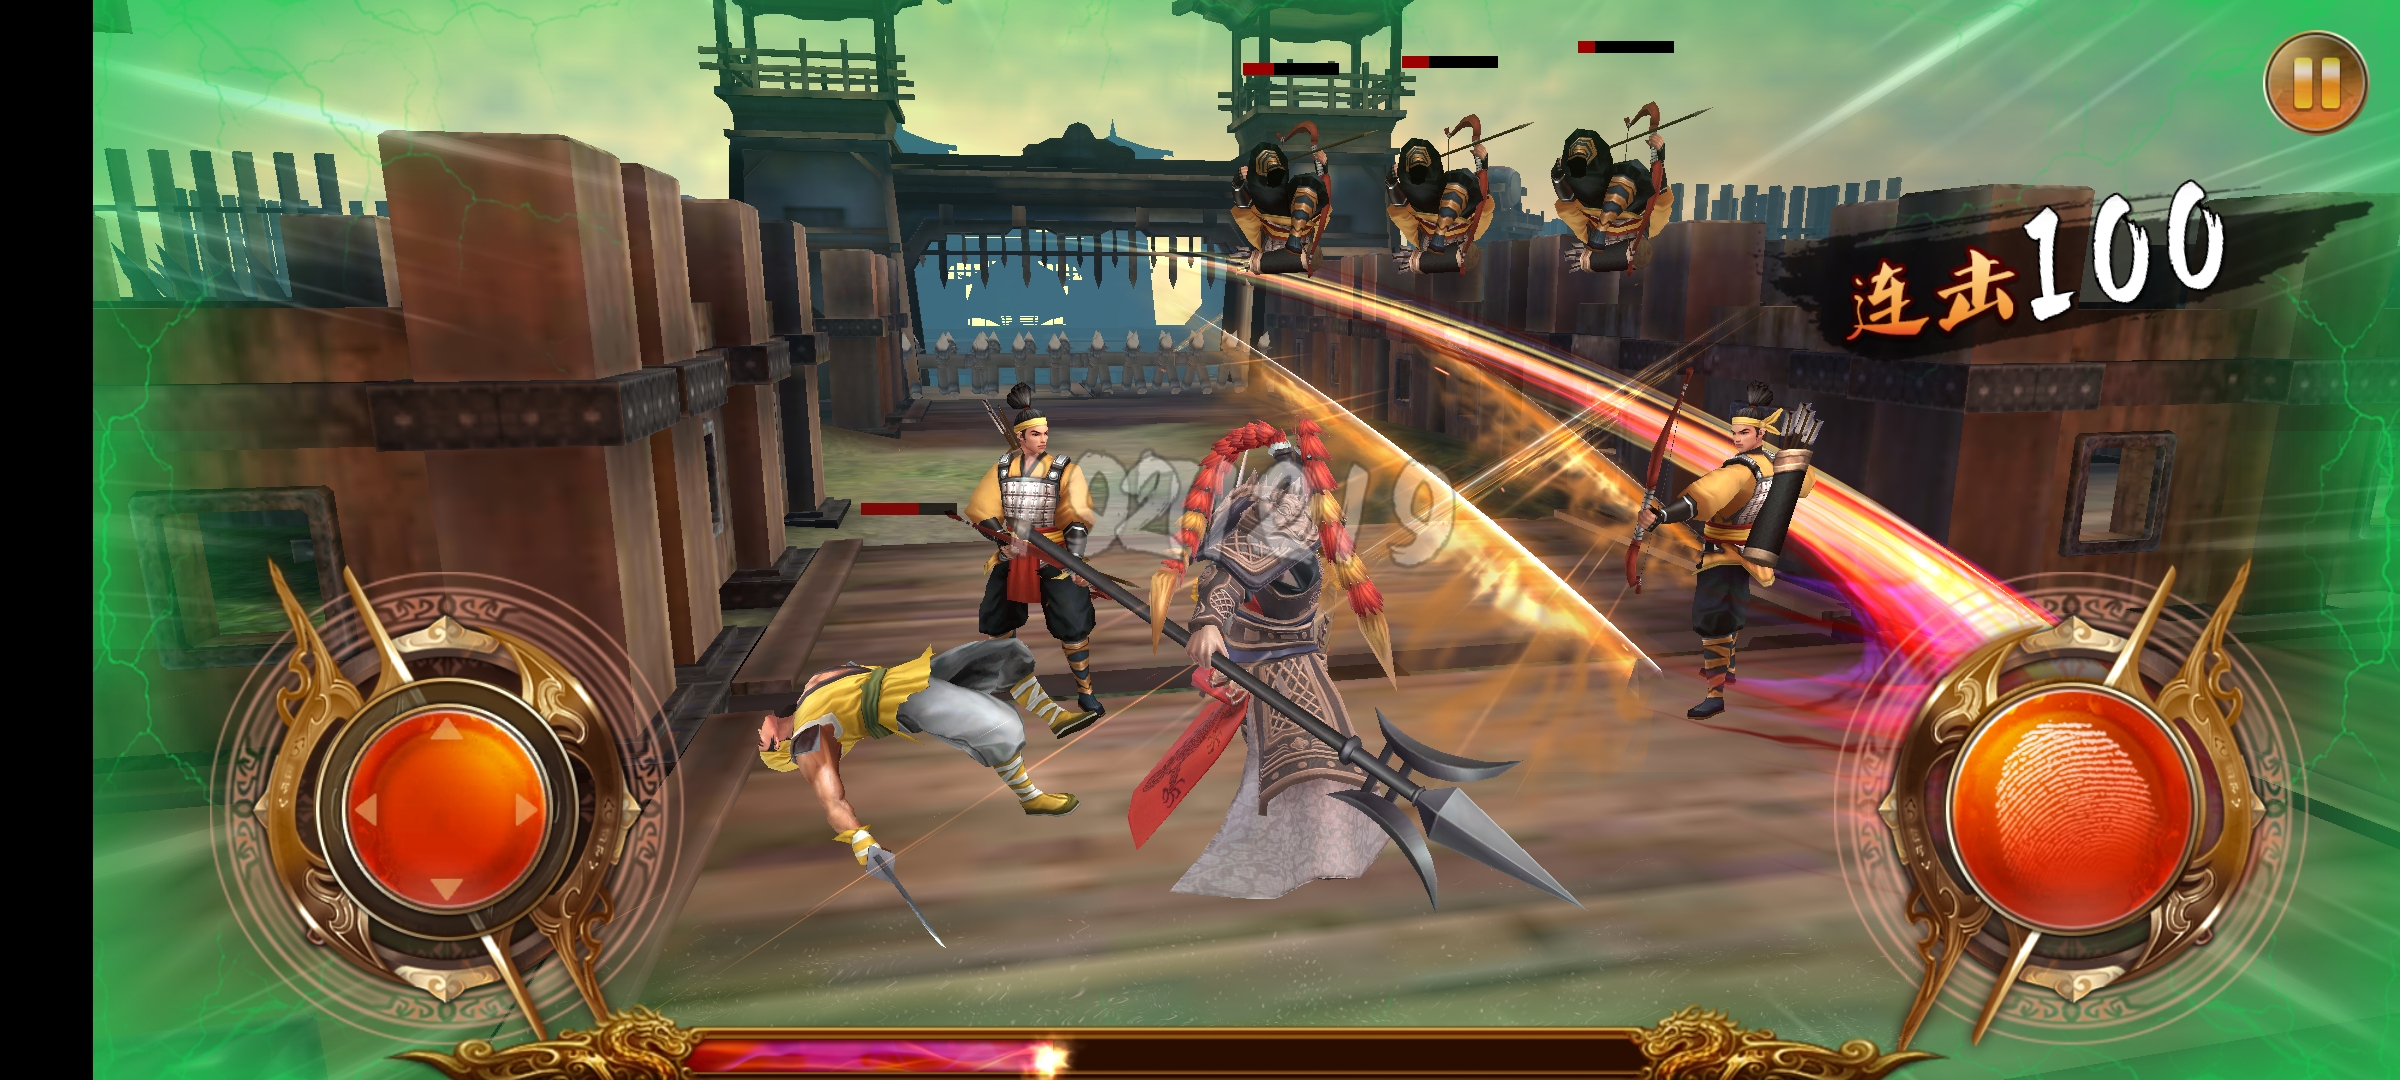 Game 悲伤的战士 ™ Warrior of Sorrow Huyền Thoại Chiến Binh Lữ Bố Cho Android